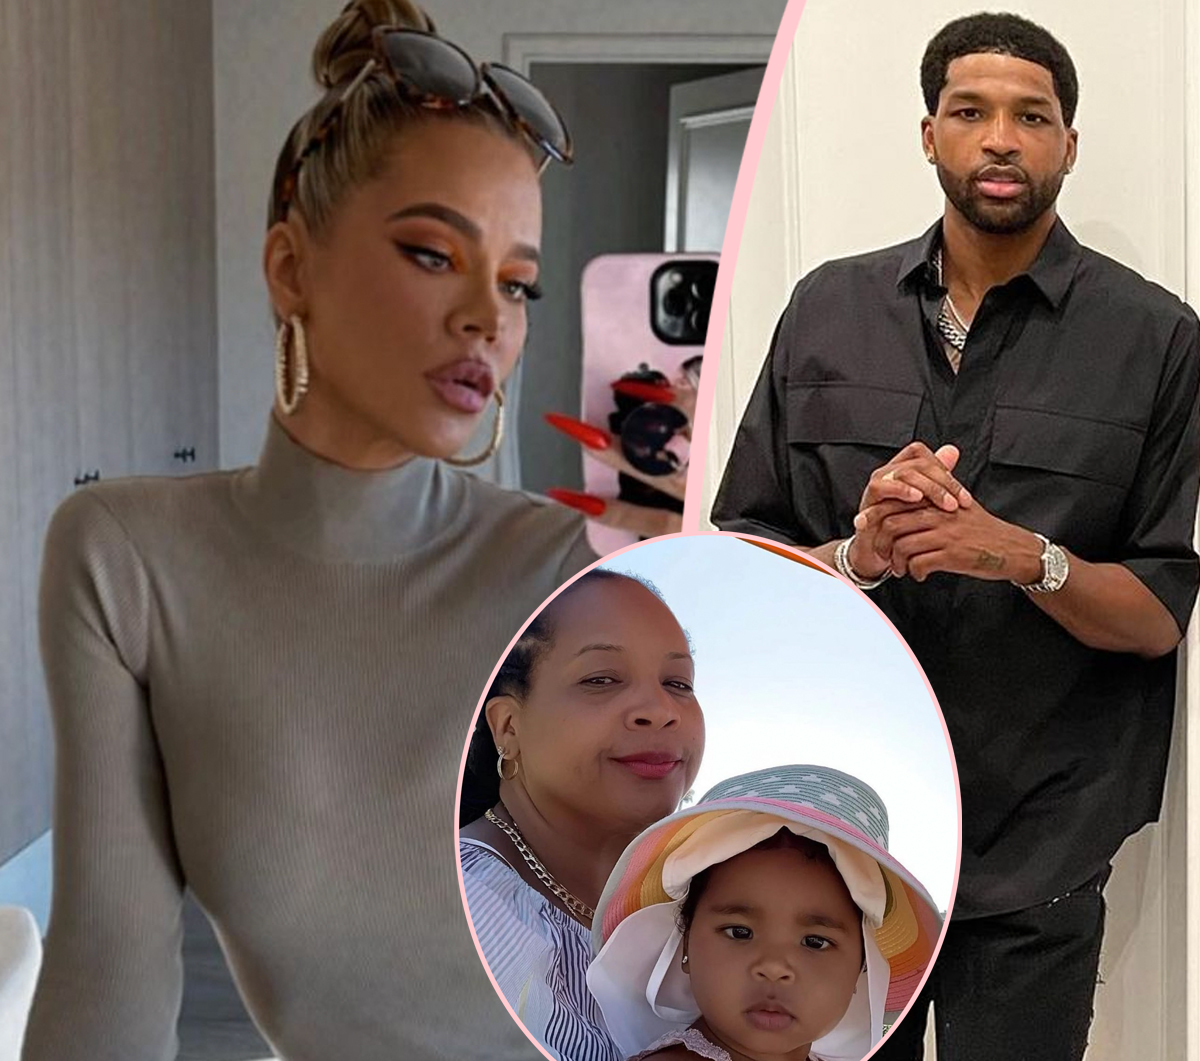 #Khloé Kardashian Plans On ‘Being There’ For Ex Tristan Thompson & His Family After The Death Of Their Mom